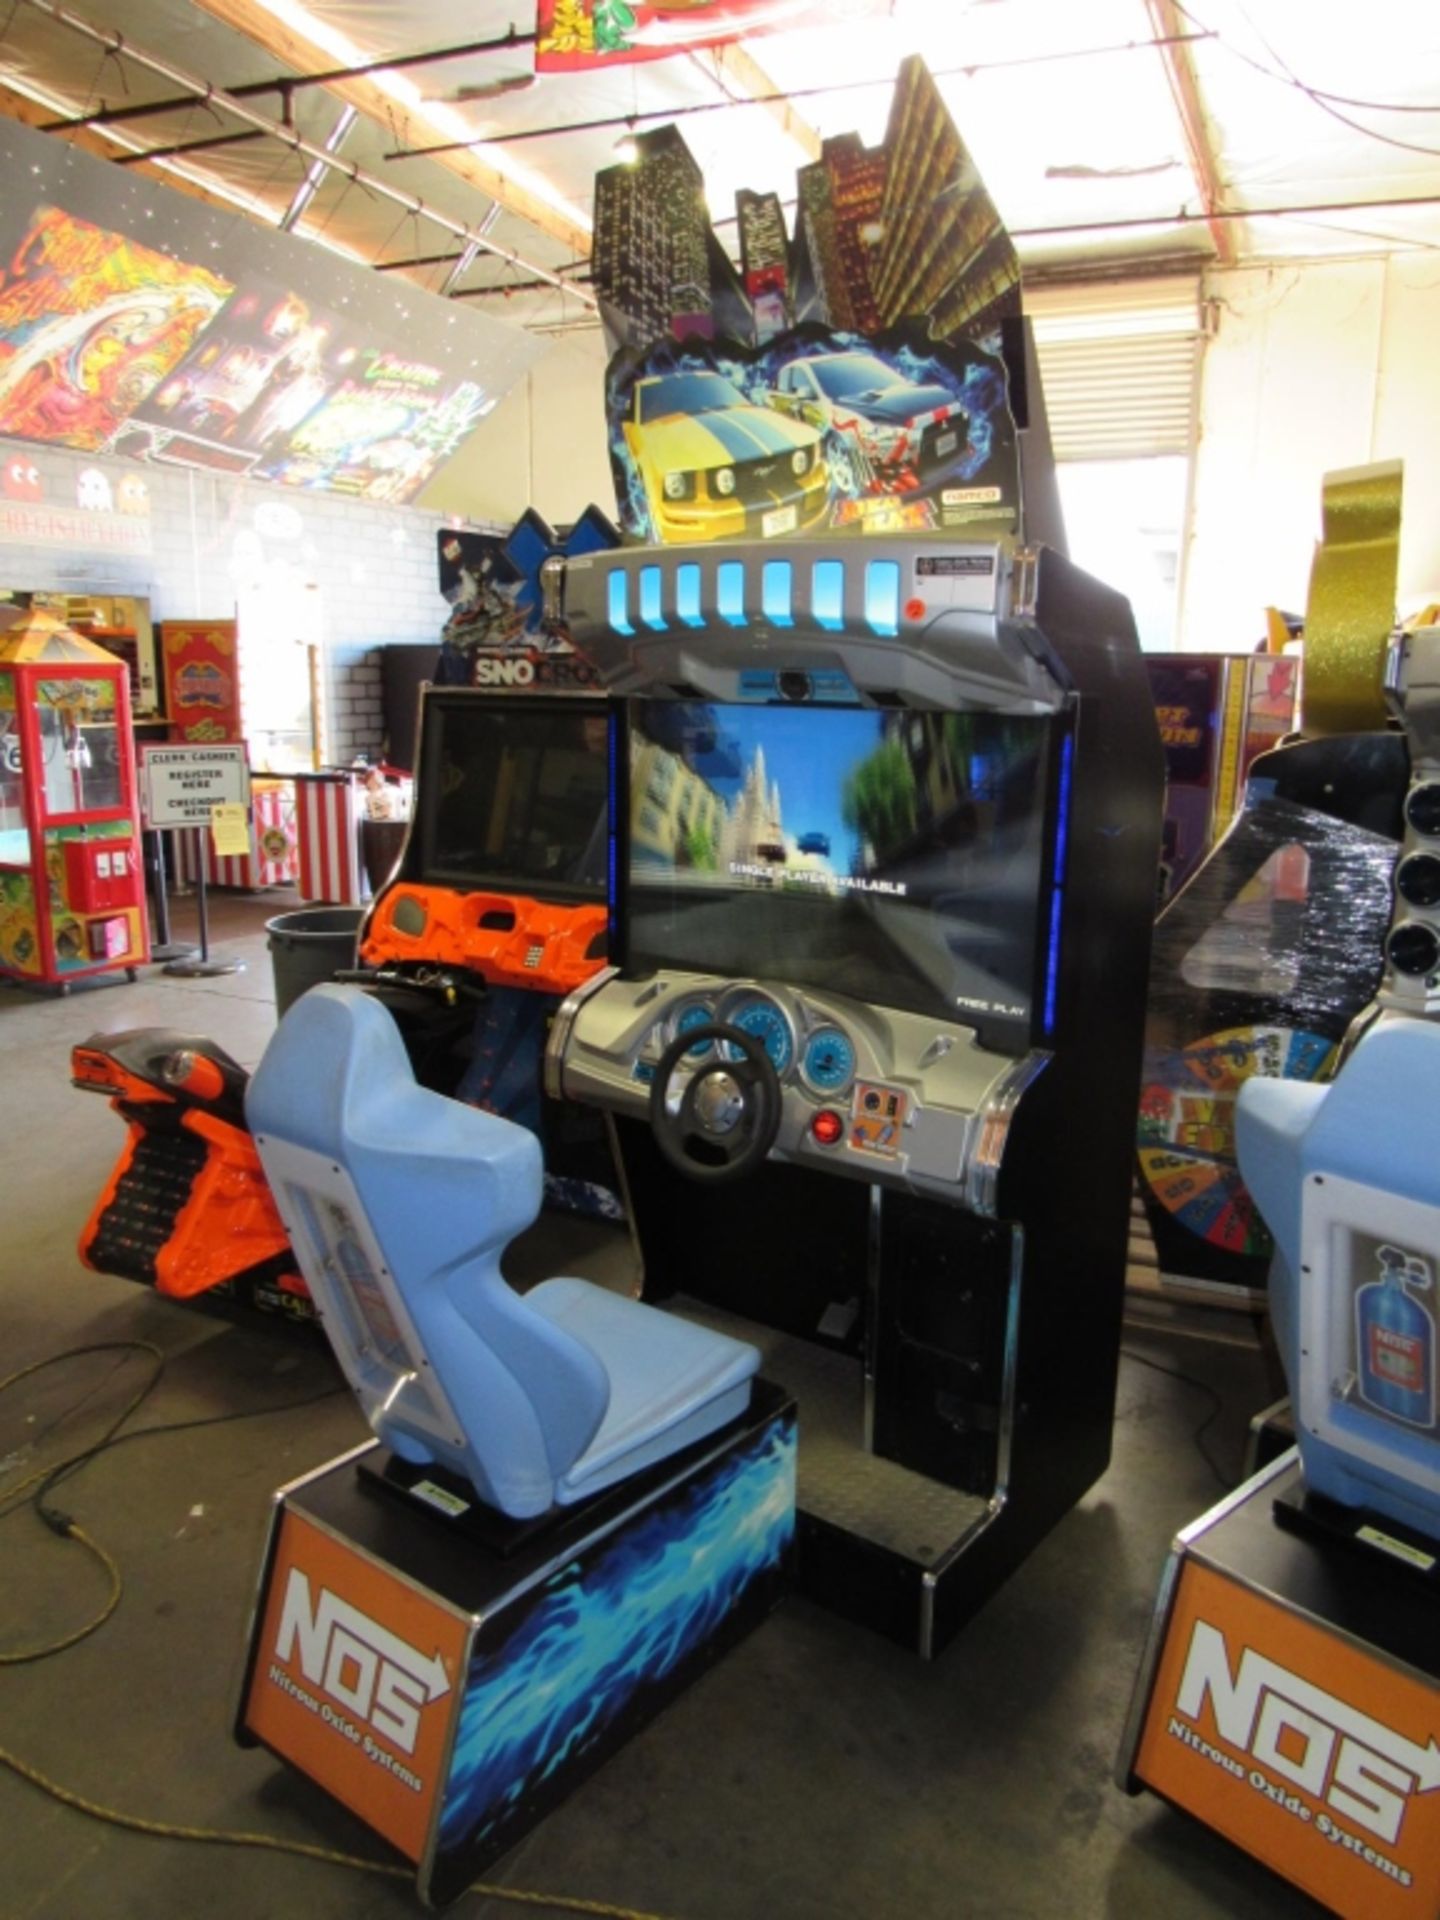 DEAD HEAT 42" DX DRIVER ARCADE GAME NAMCO - Image 3 of 6